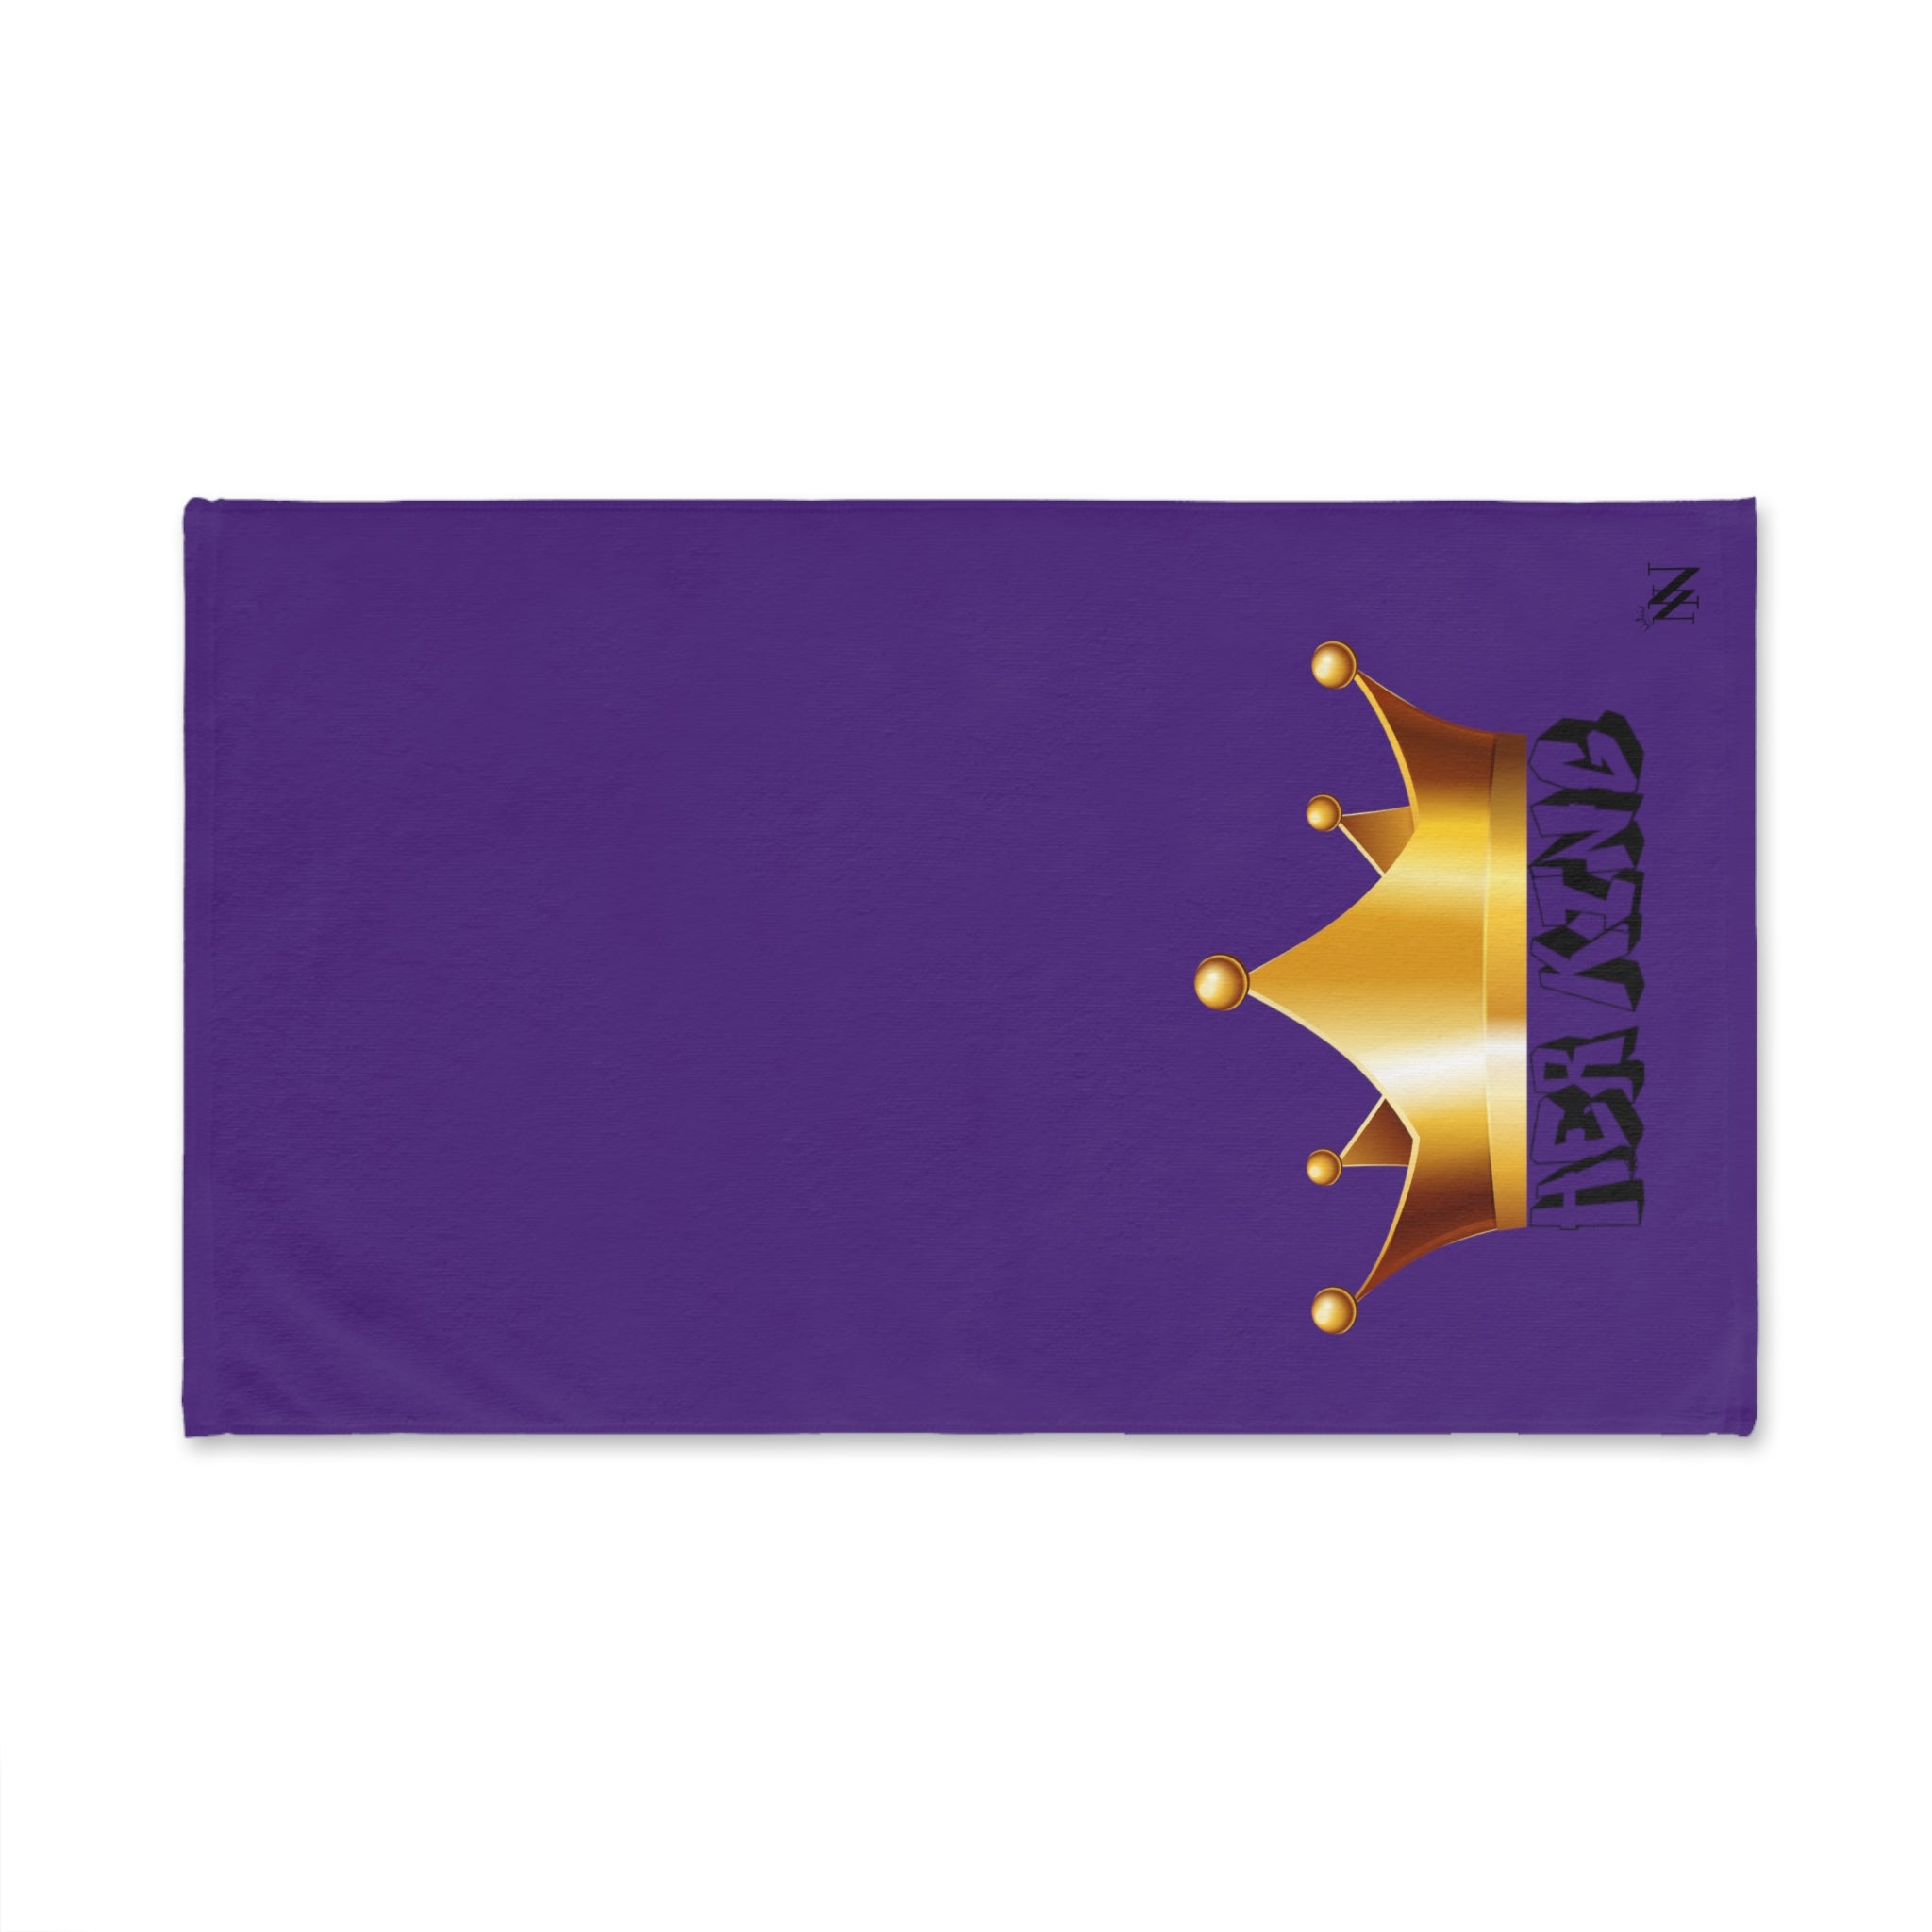 Gold Her King Purple | Funny Gifts for Men - Gifts for Him - Birthday Gifts for Men, Him, Husband, Boyfriend, New Couple Gifts, Fathers & Valentines Day Gifts, Christmas Gifts NECTAR NAPKINS